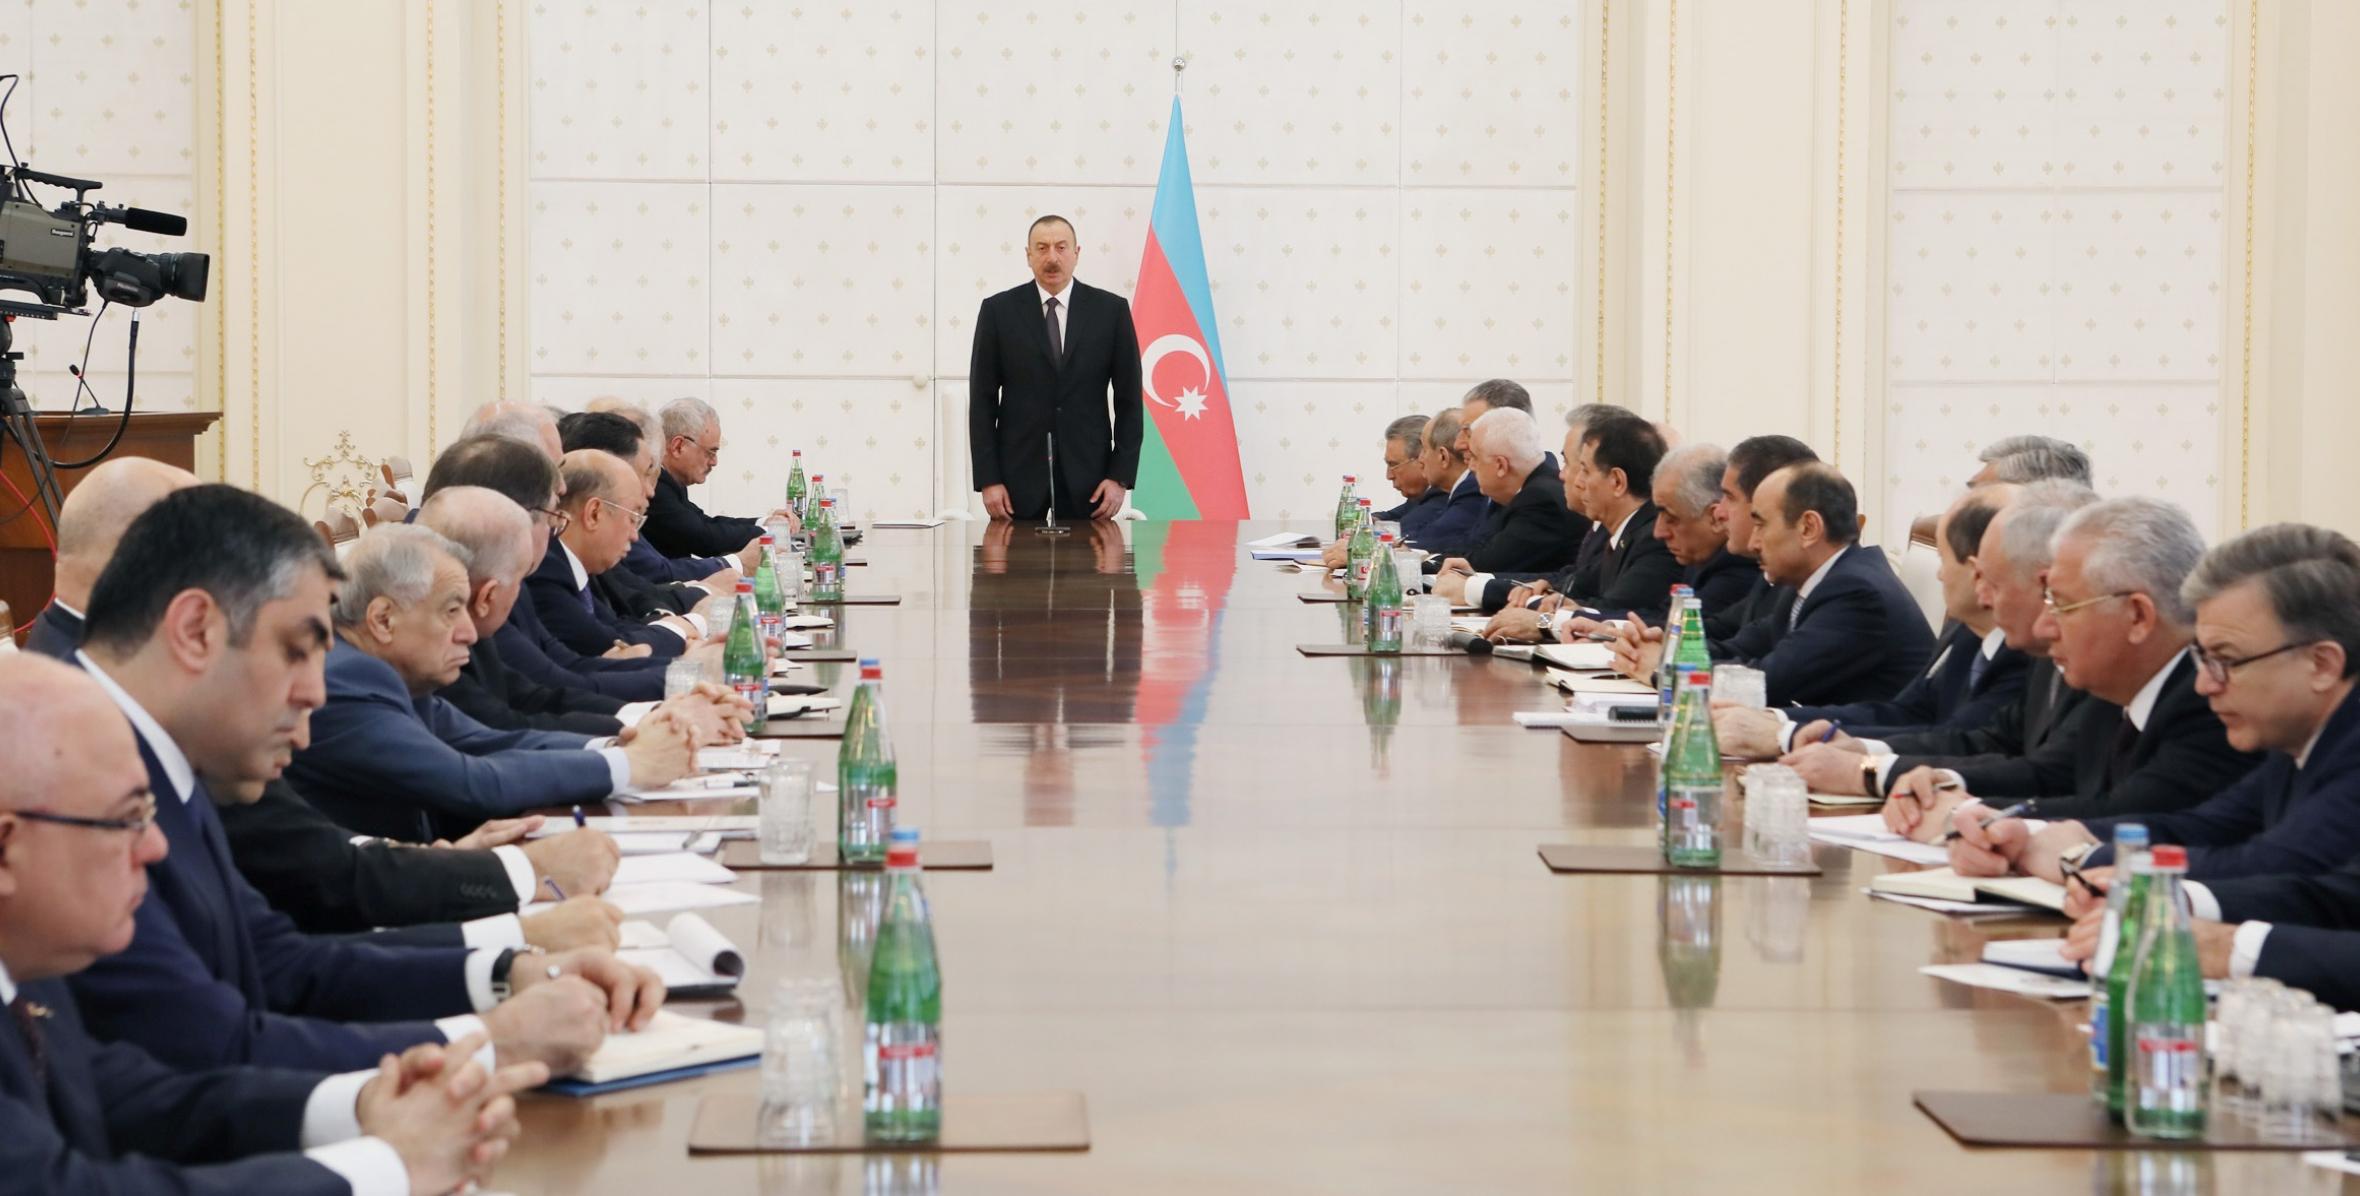 Ilham Aliyev chaired Cabinet meeting on results of first quarter of 2017 and future tasks